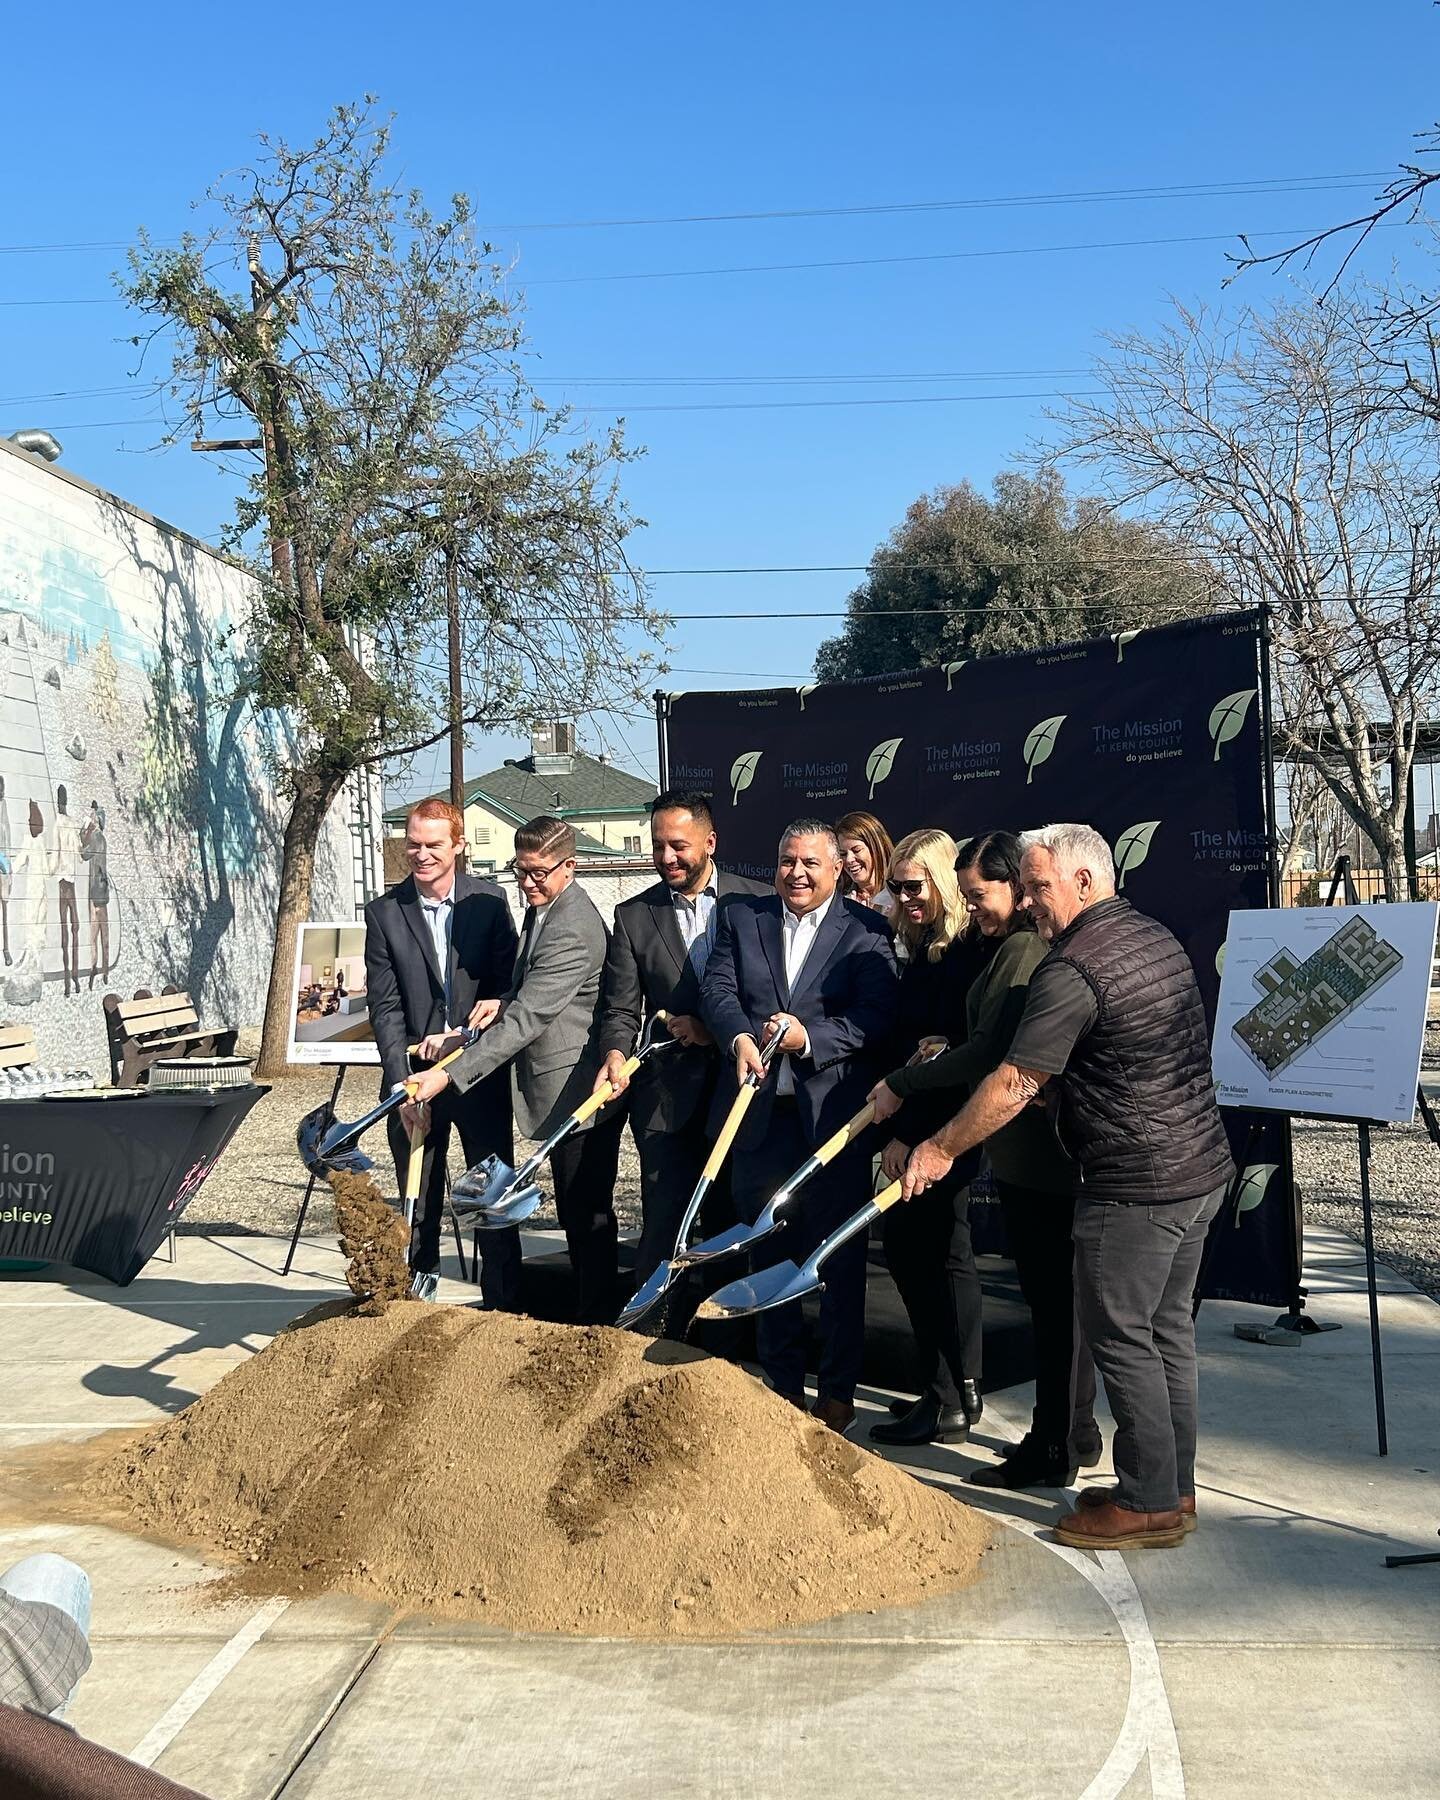 A few weeks ago we attended the groundbreaking for The Mission at Kern County&rsquo;s new renovation on their homeless intervention center. For Elevate, humanity is always the driving force in these types of projects. We are thankful to be a part of 